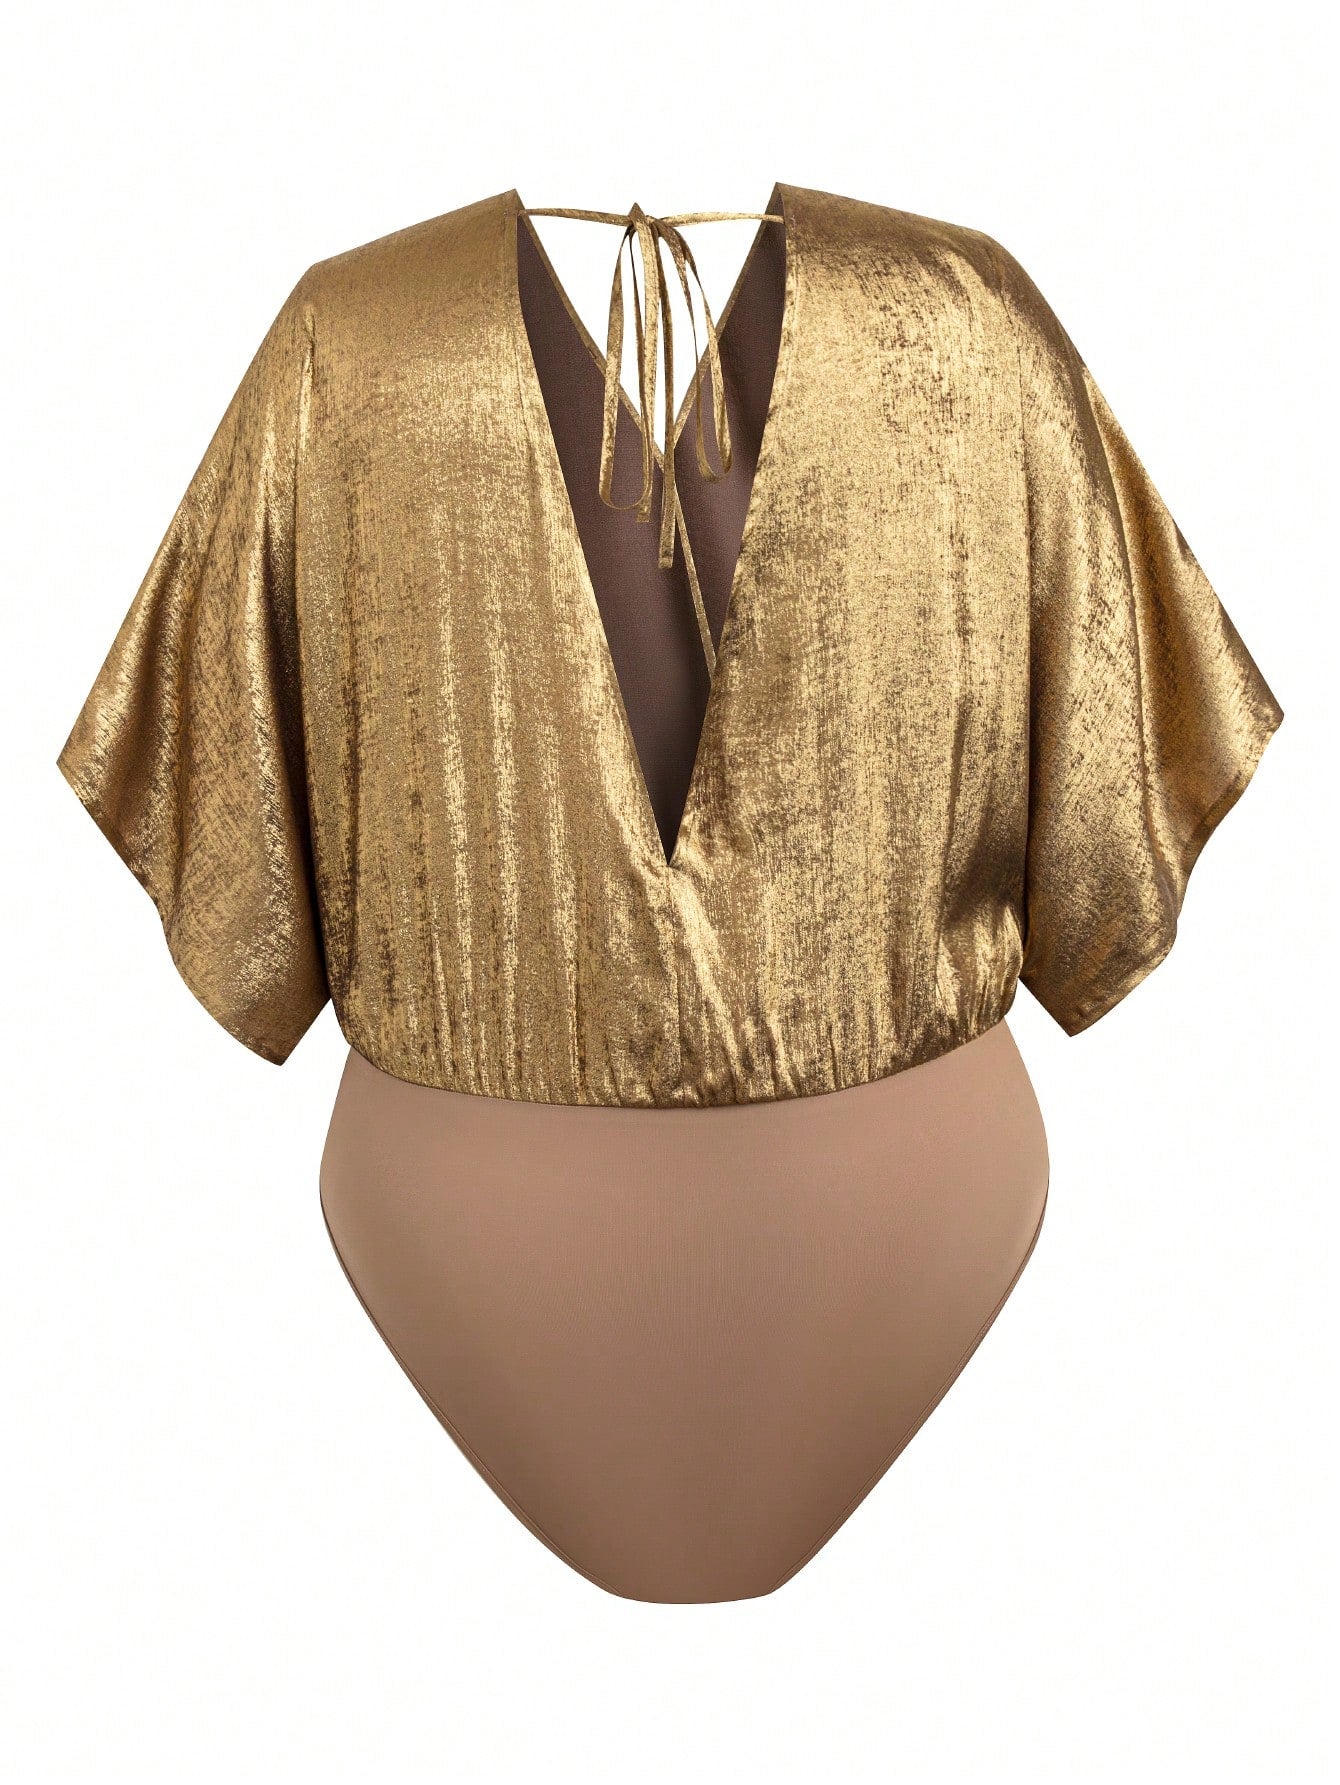 Plus size gold sequin bodysuit from behind on a white background